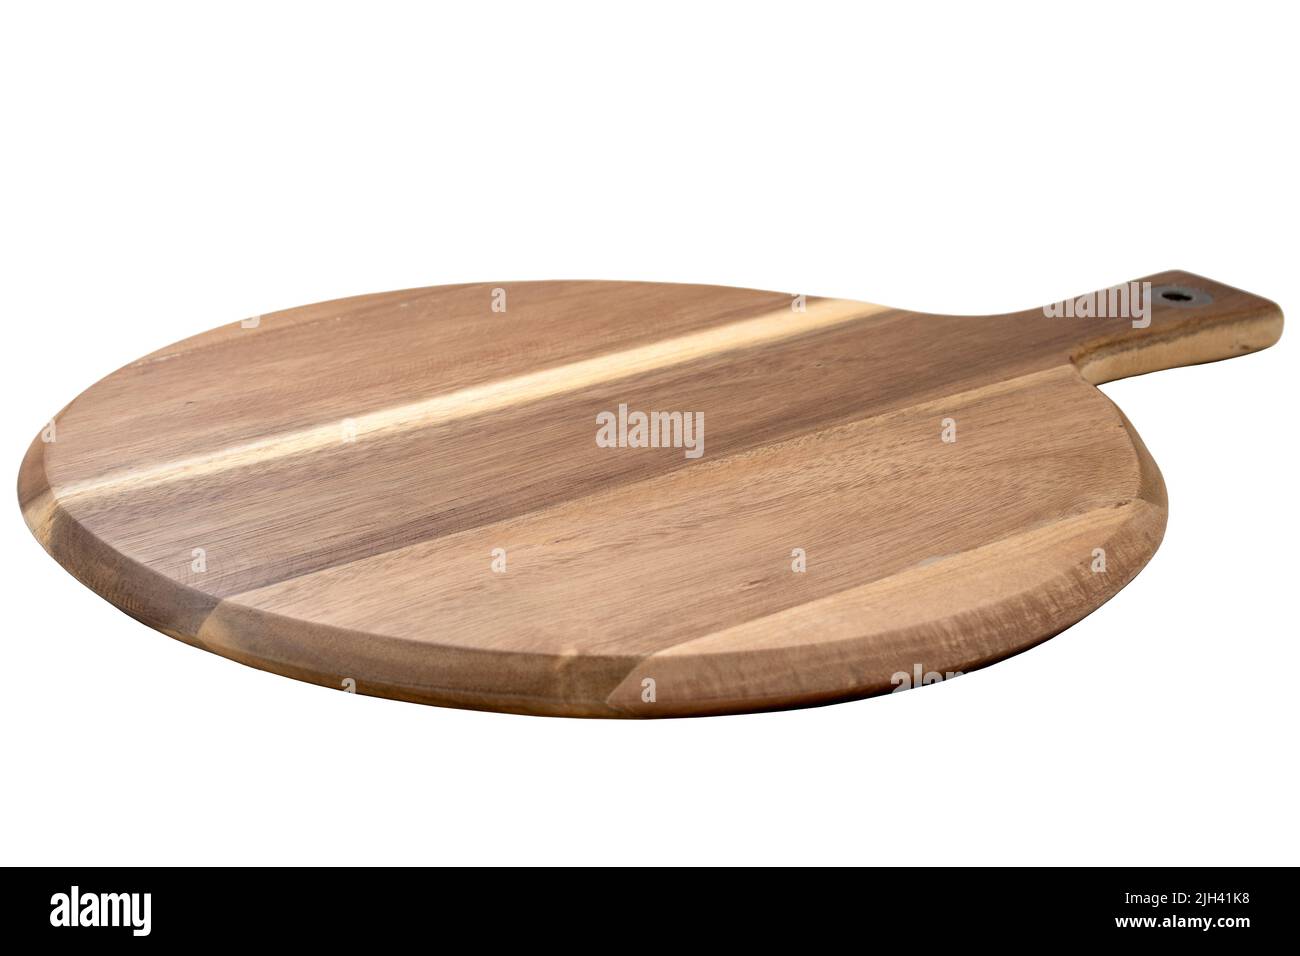 Food preparation tool, pizza platter and kitchen utensil concept with close-up on disk shaped wood chopping board with round corners isolated on white Stock Photo